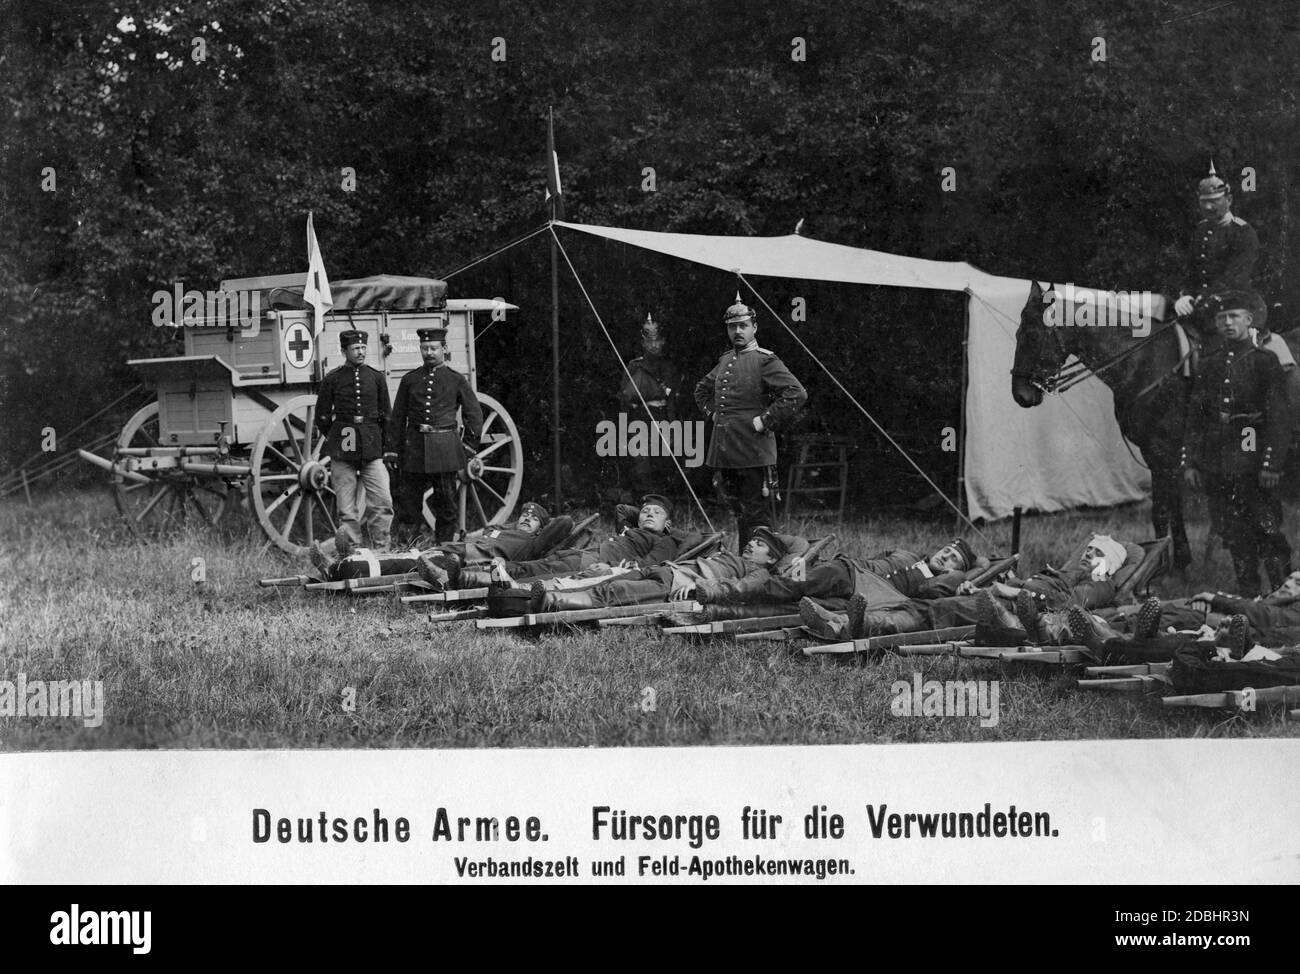 Paramedics of the German Army with wounded at a first-aid tent and field pharmacy car. Stock Photo